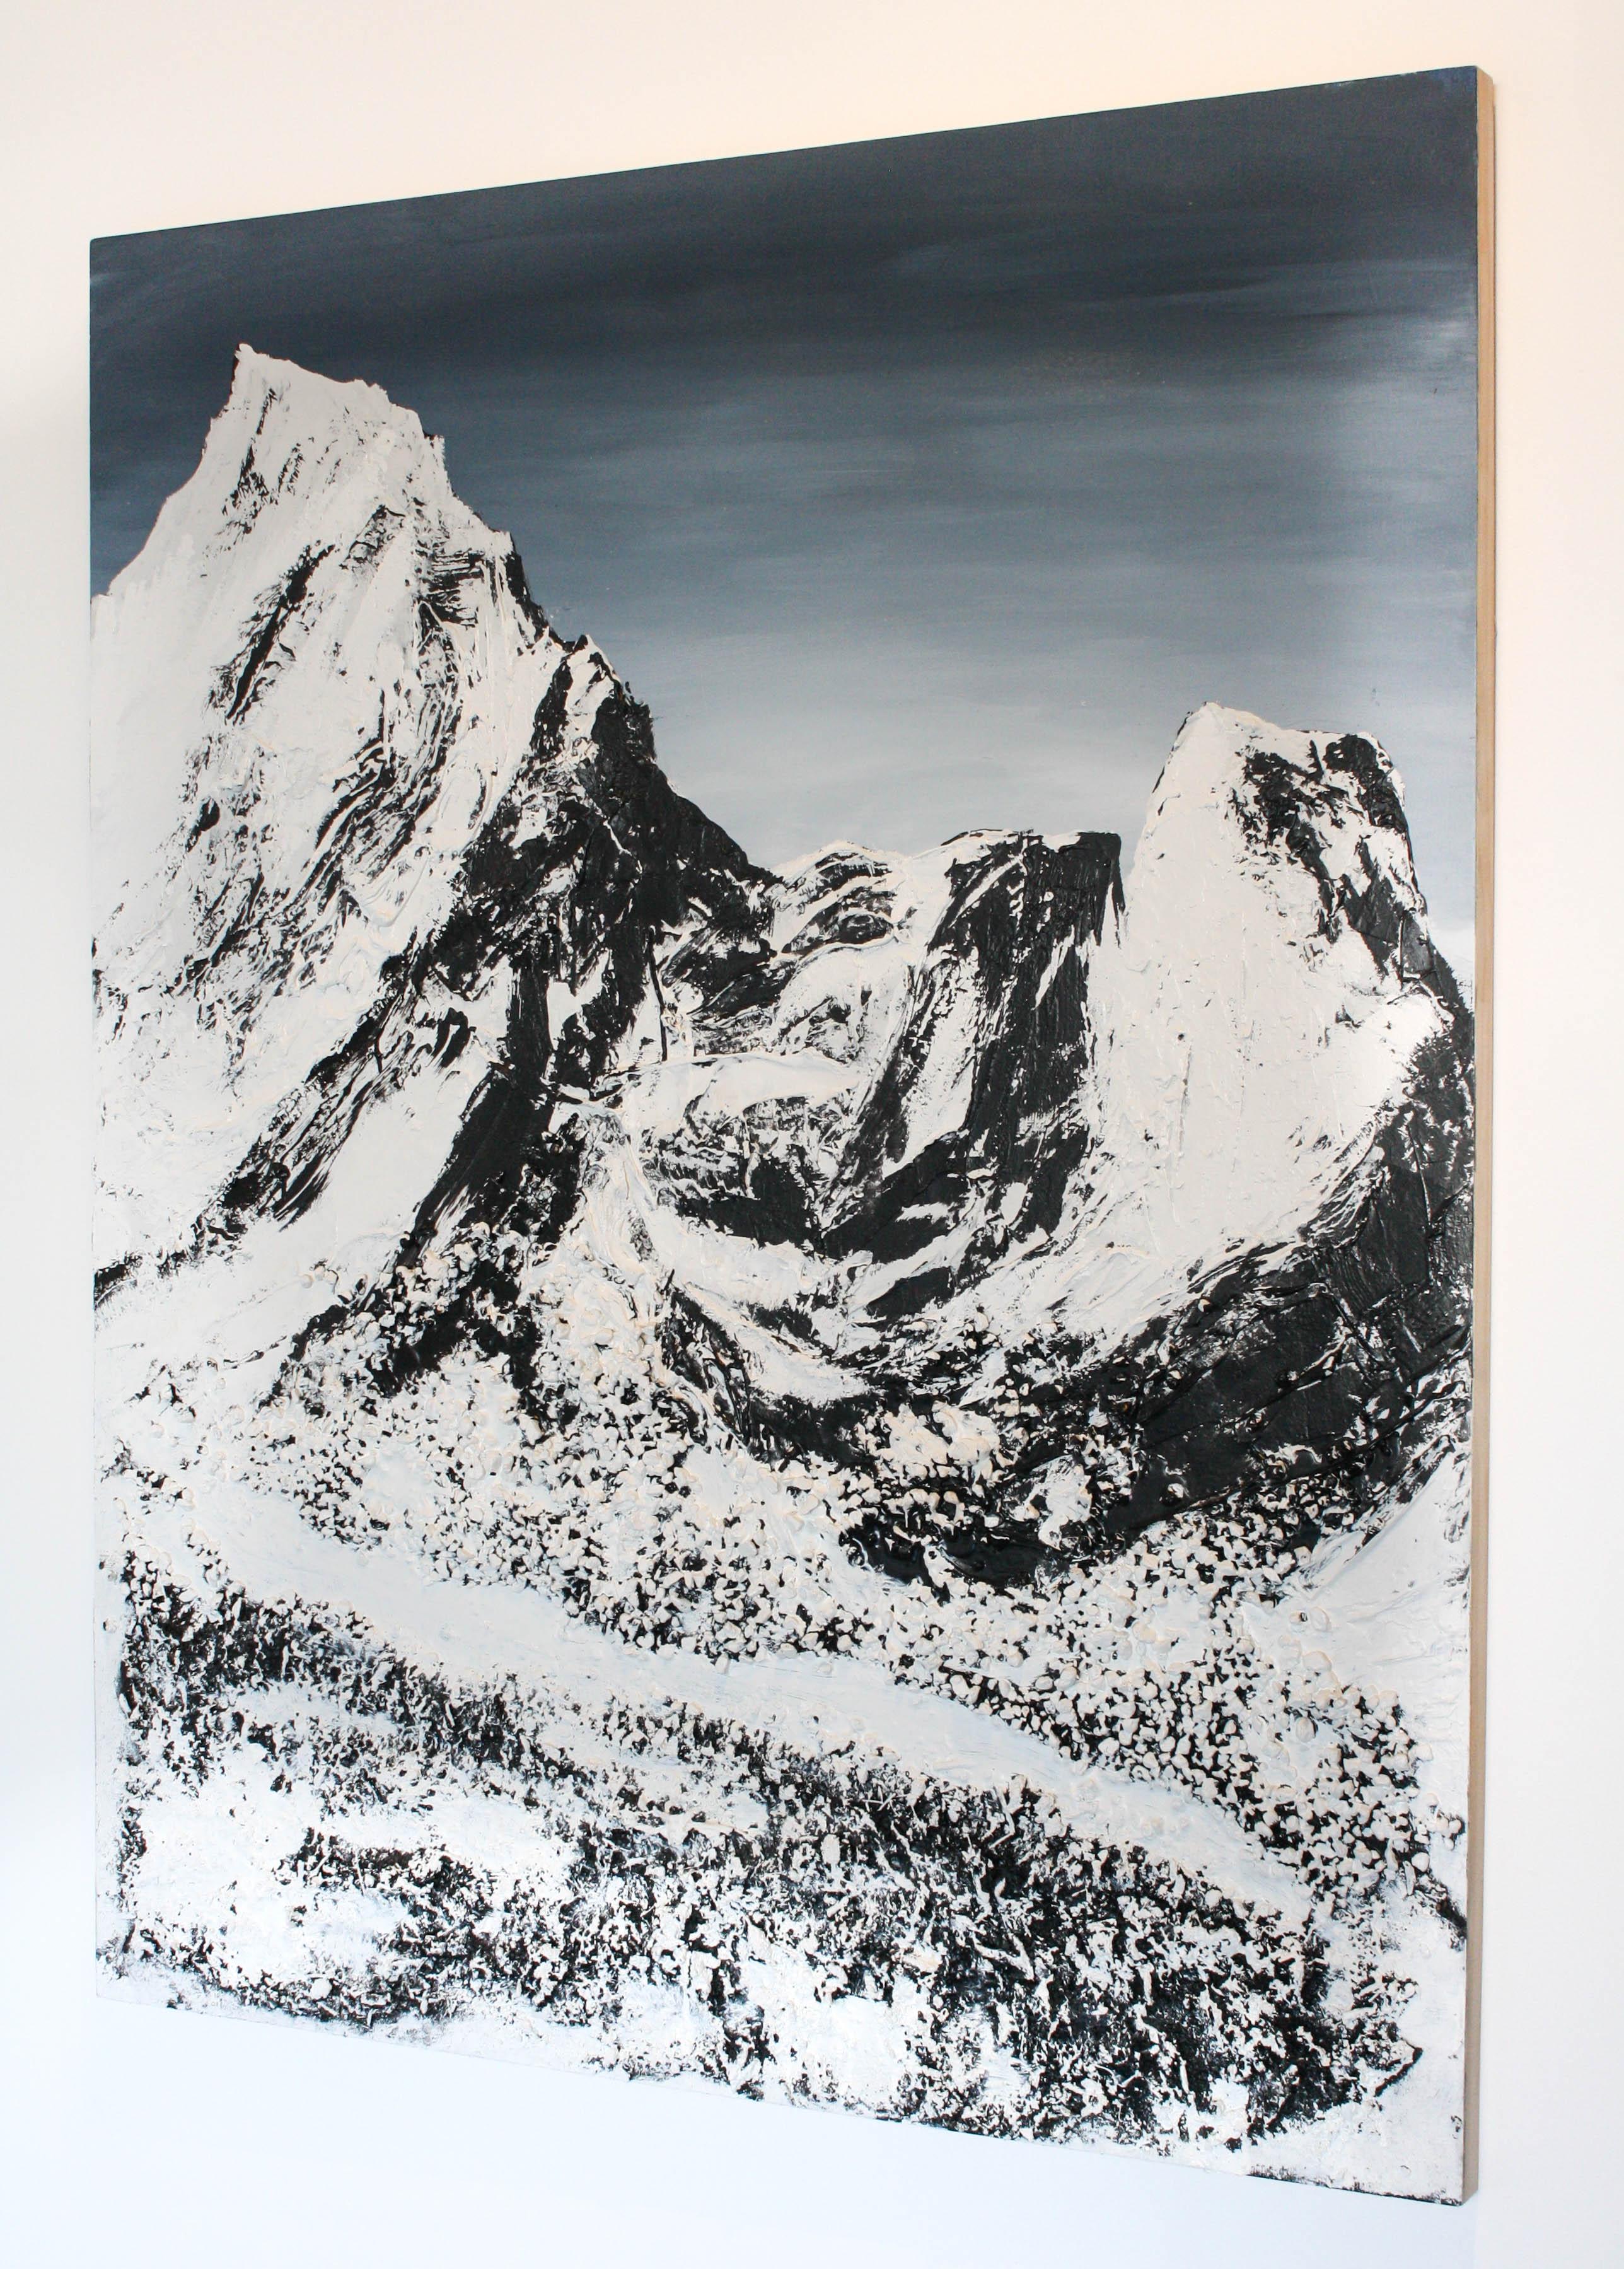 Mastodon- Landscape, Abstract, Canvas, Mixed Media, Mountain, Blue, Black, White - Painting by Daniel Holland